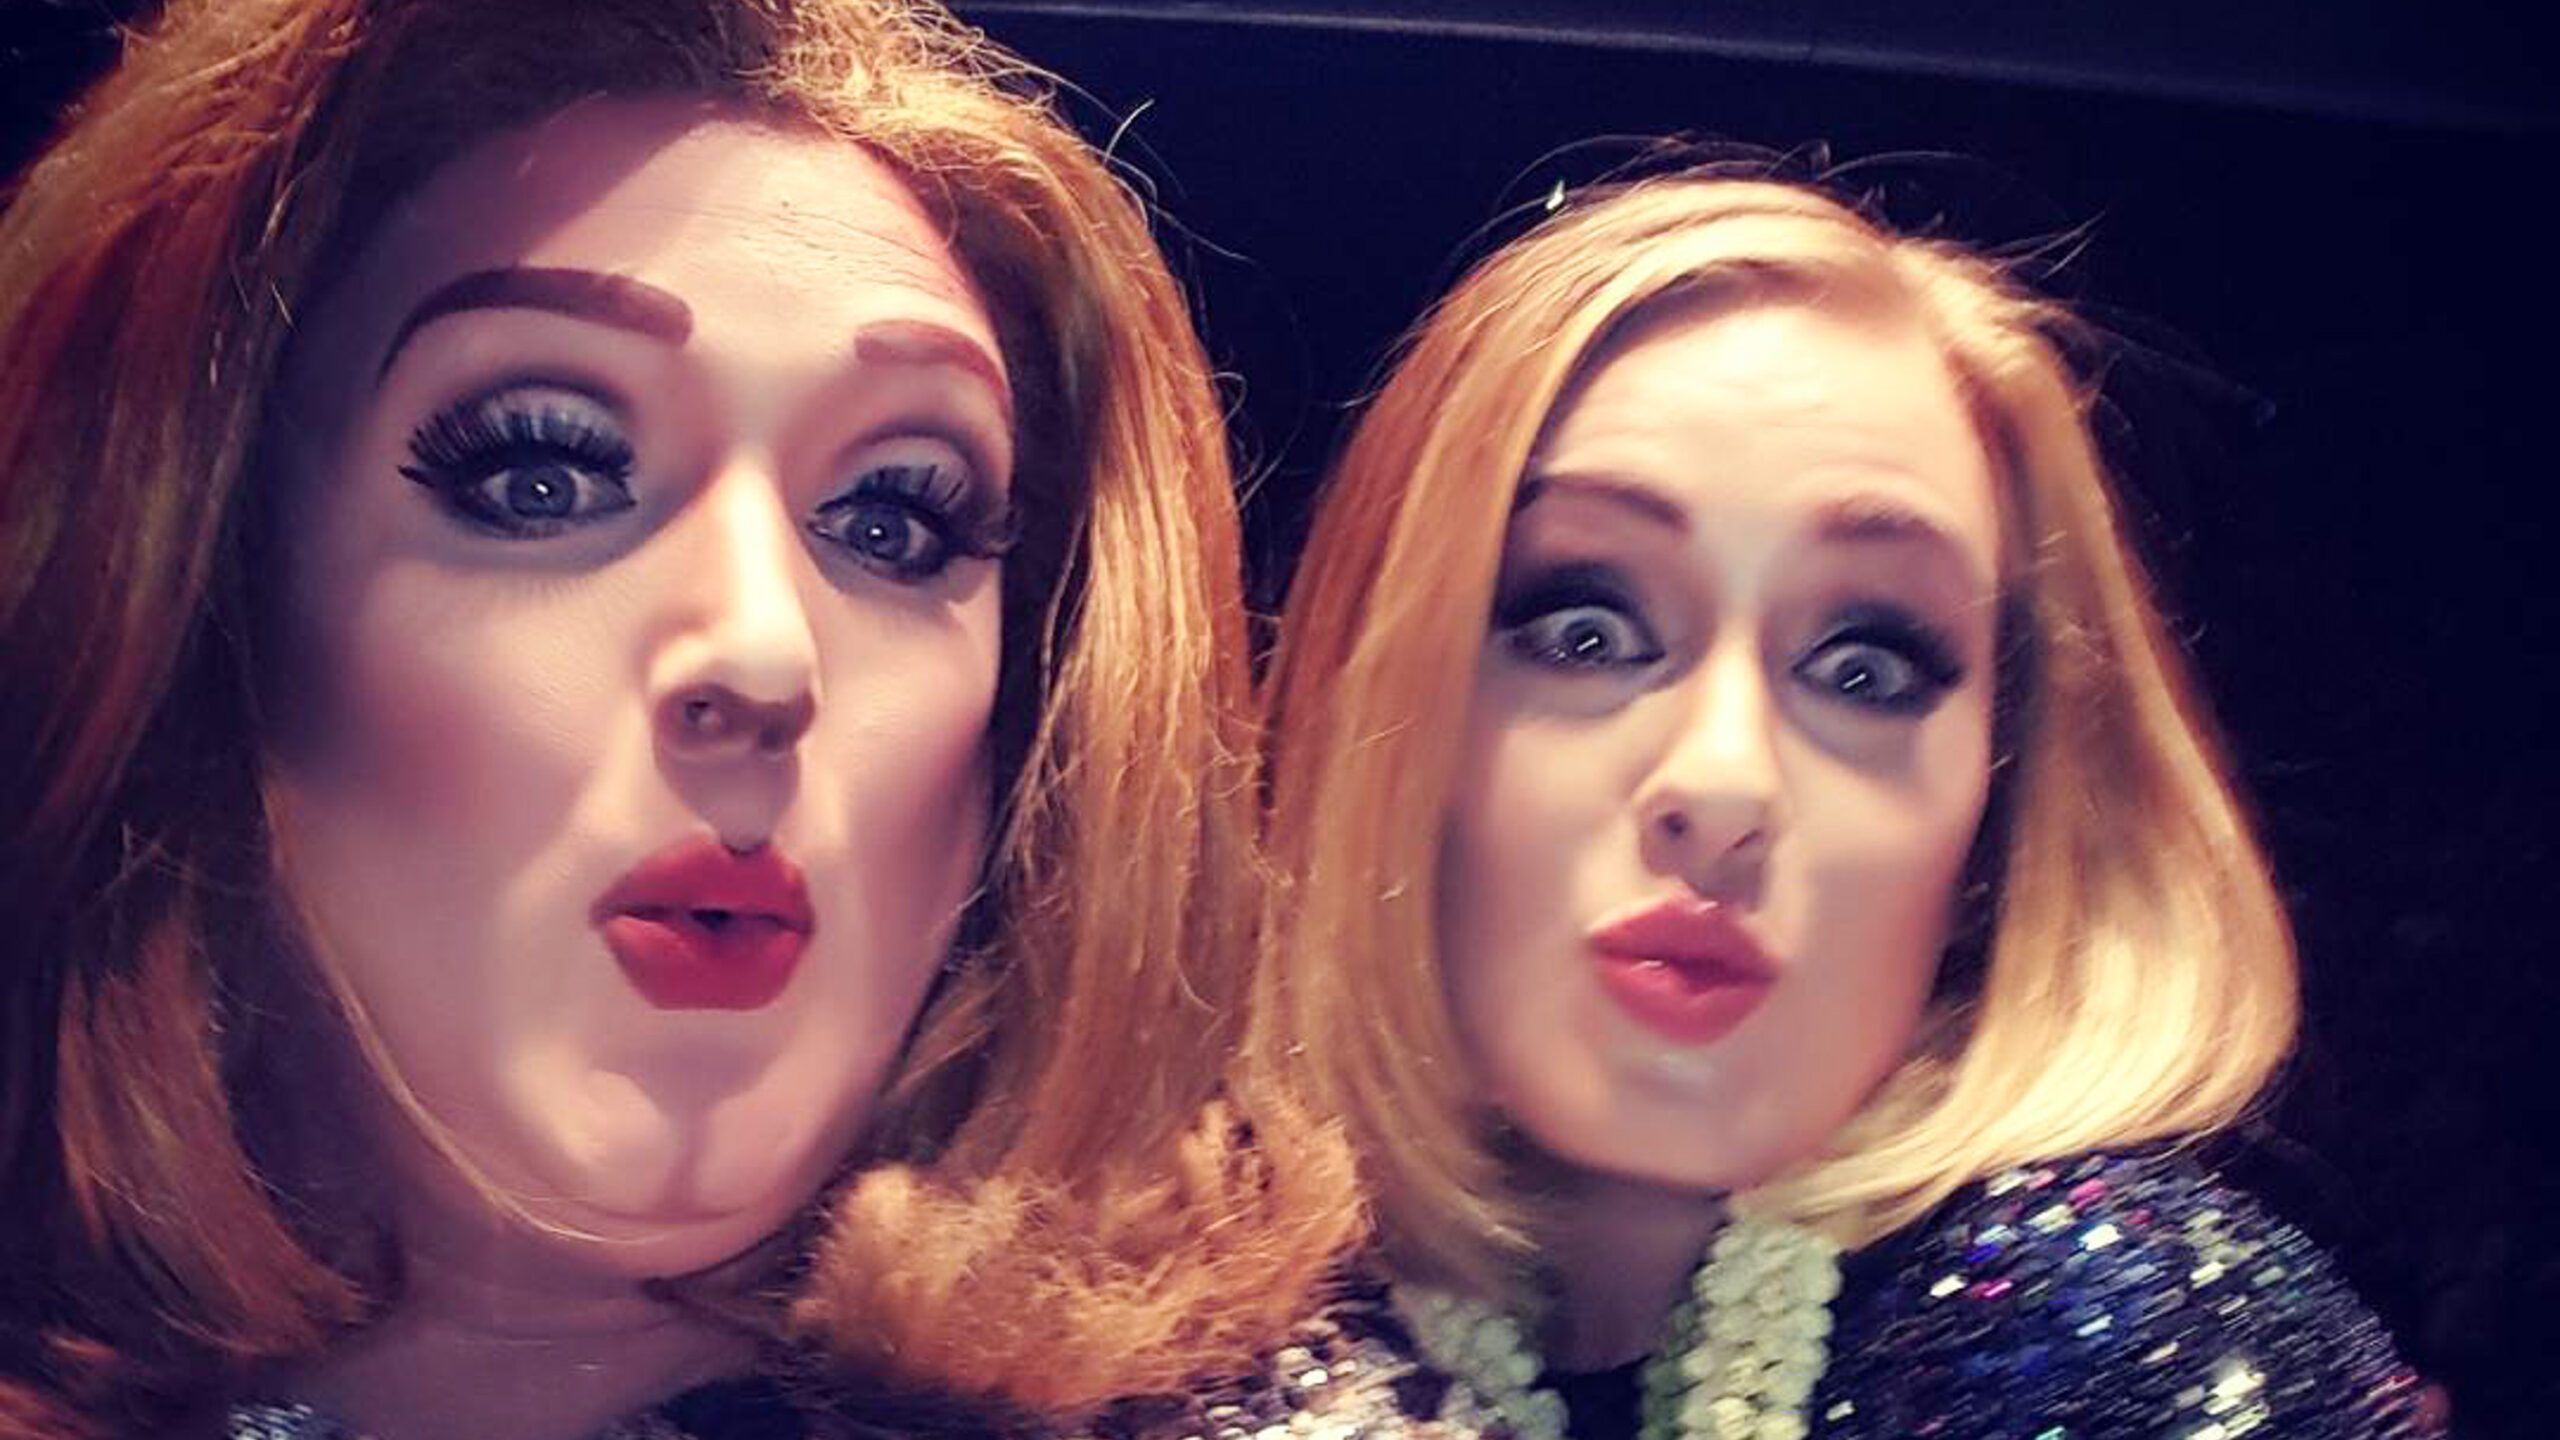 WATCH: Adele invites drag impersonator onstage